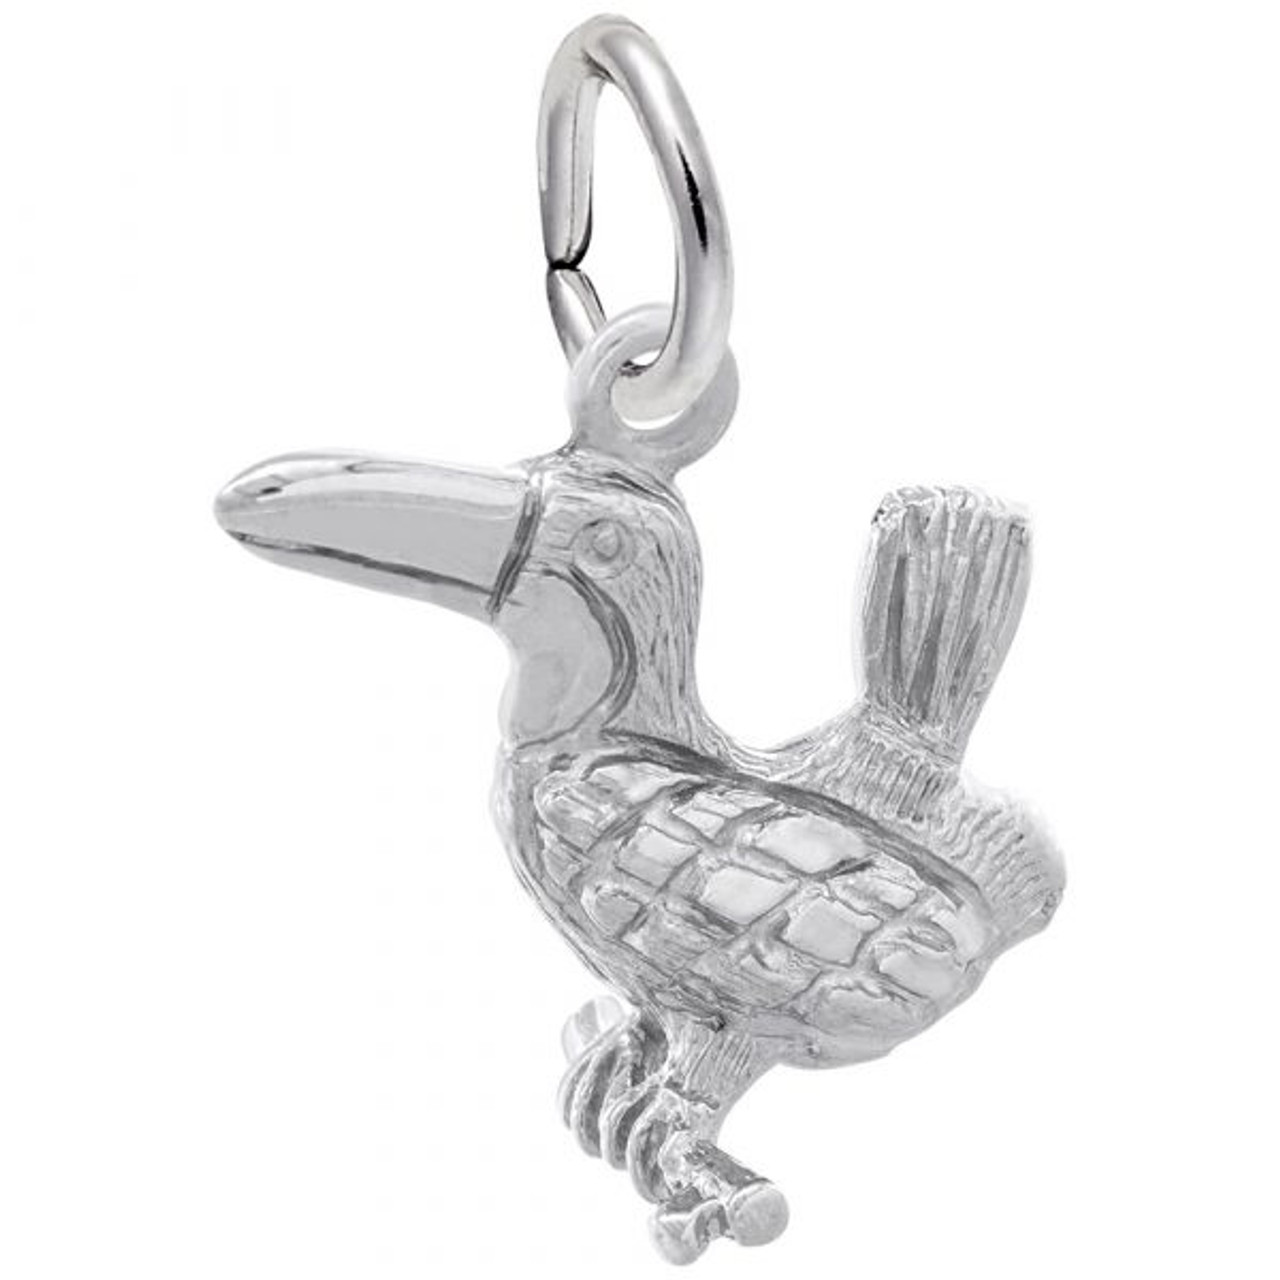 Toucan Silver Charm - Sterling Silver and 14k White Gold